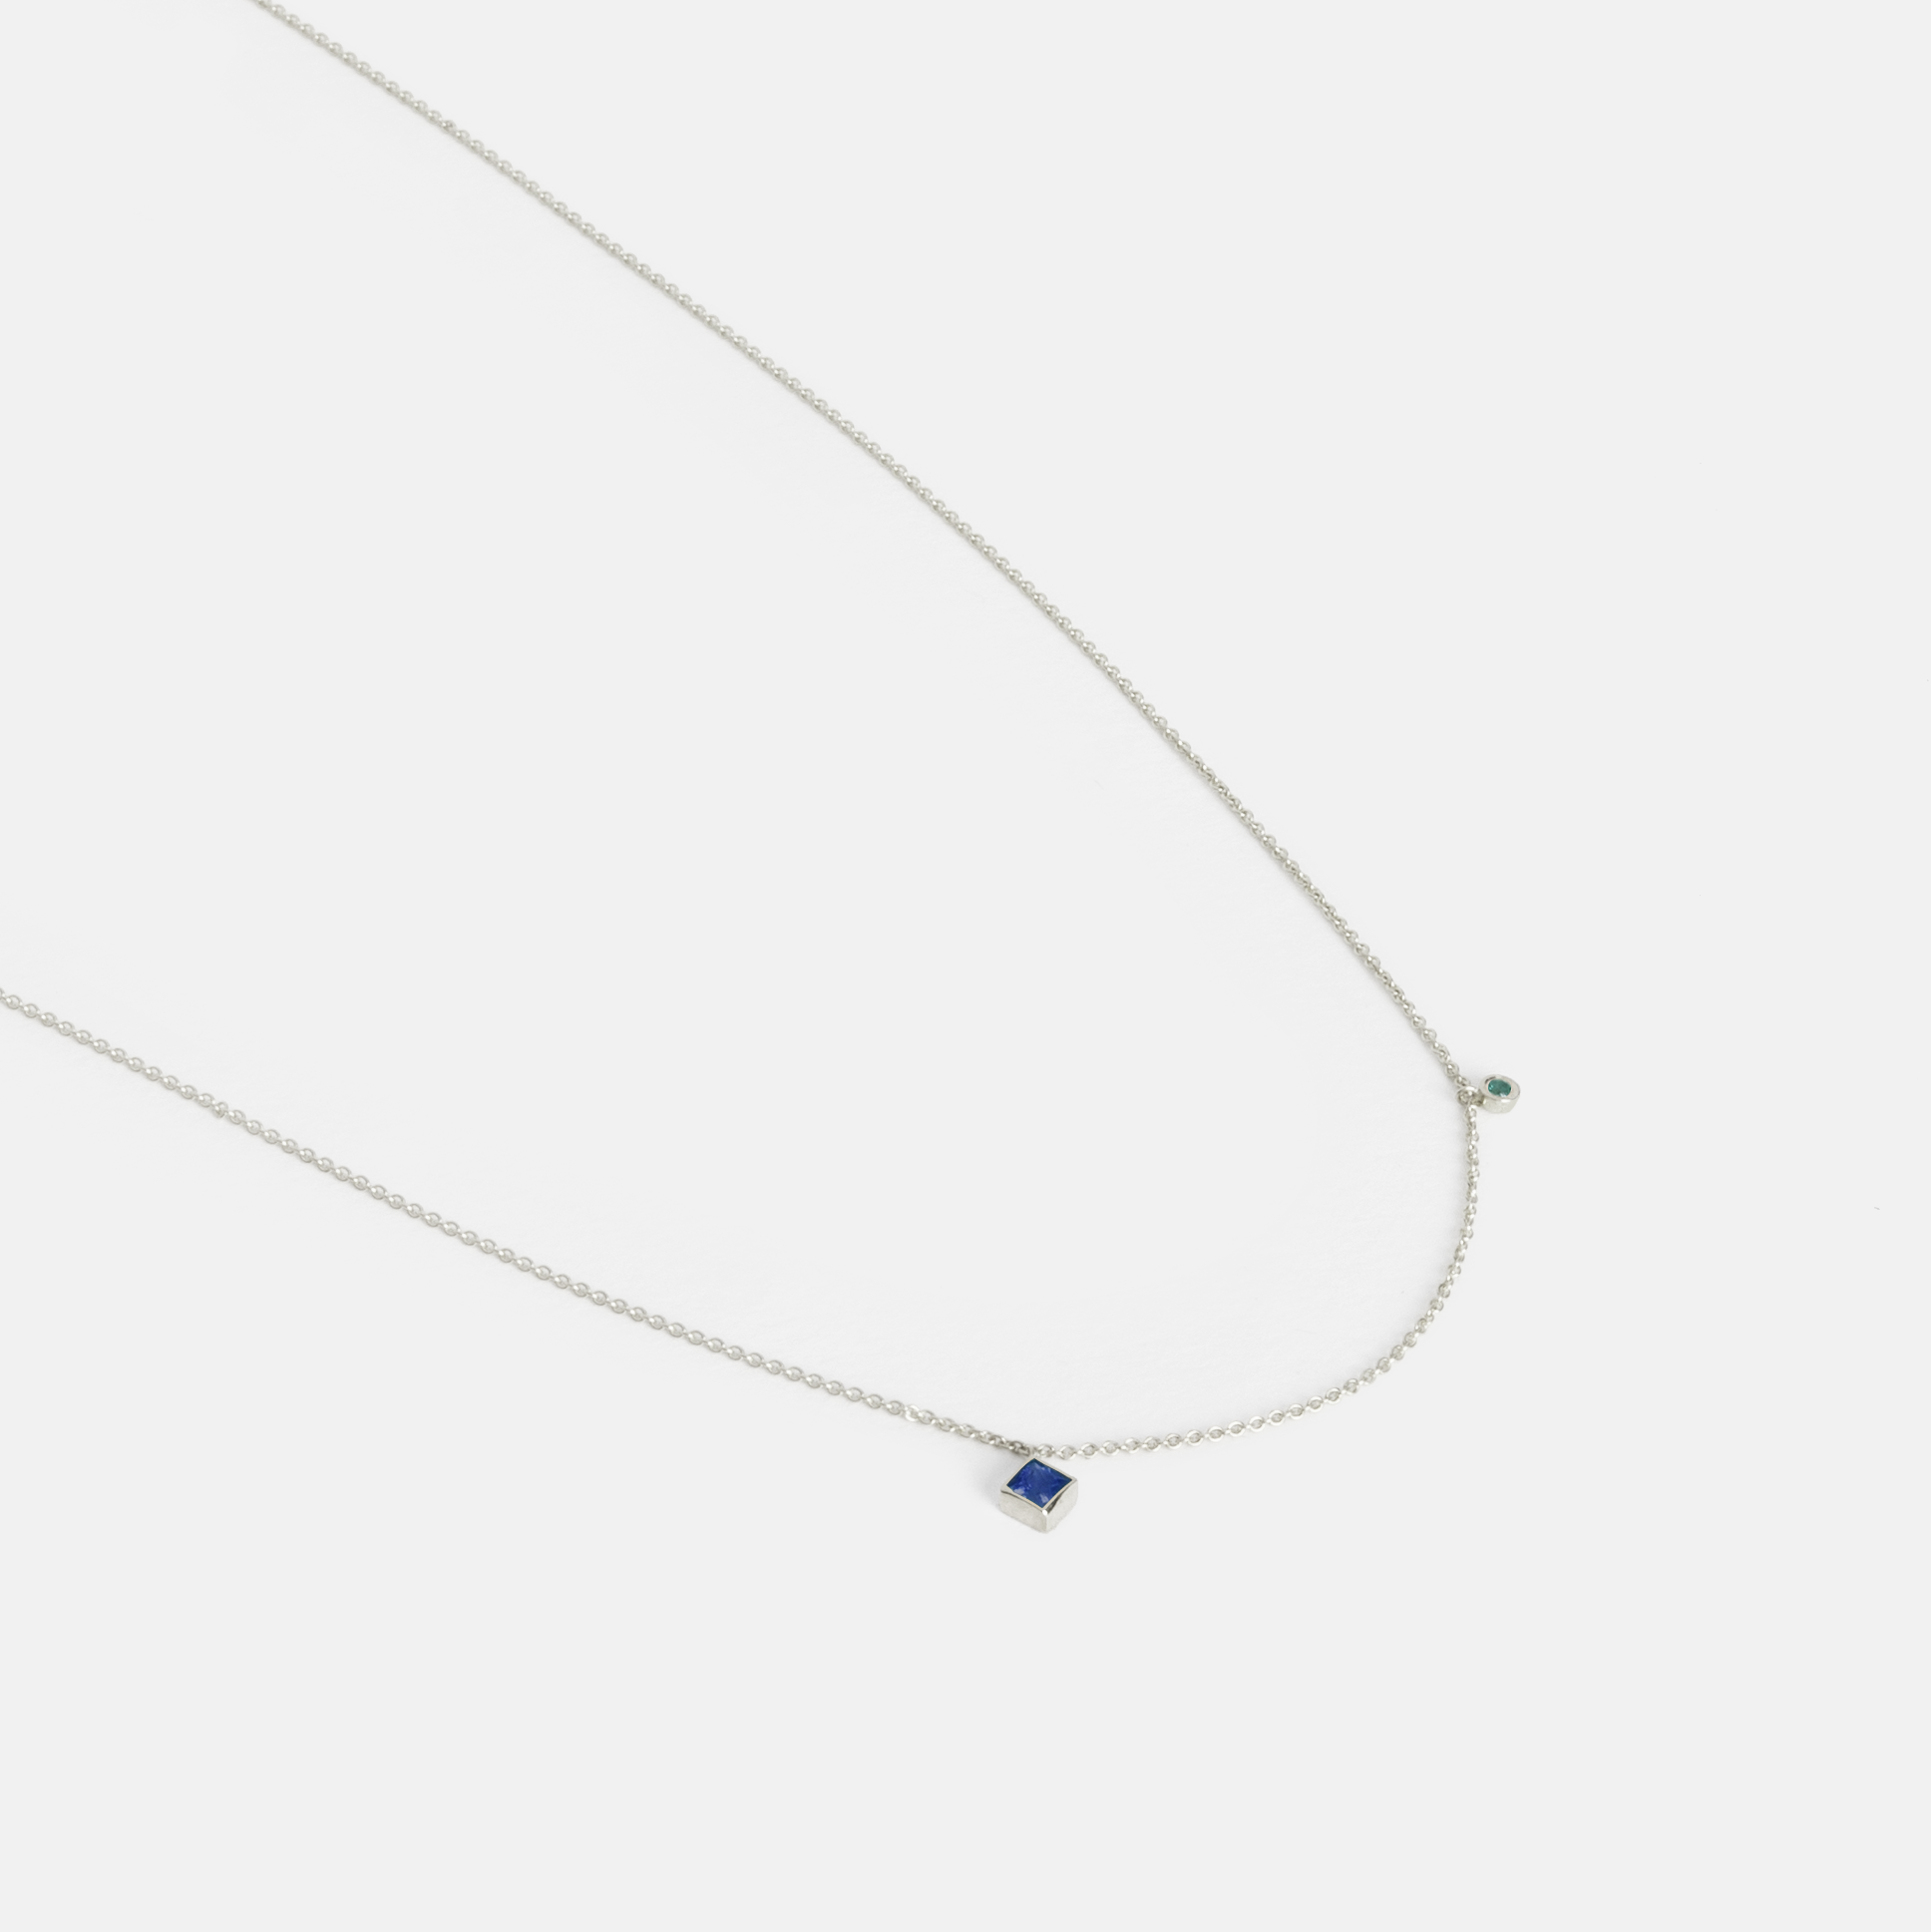  Ibi Thin Necklace in 14k White Gold set with Emerald and Sapphire By SHW Fine Jewelry NYC